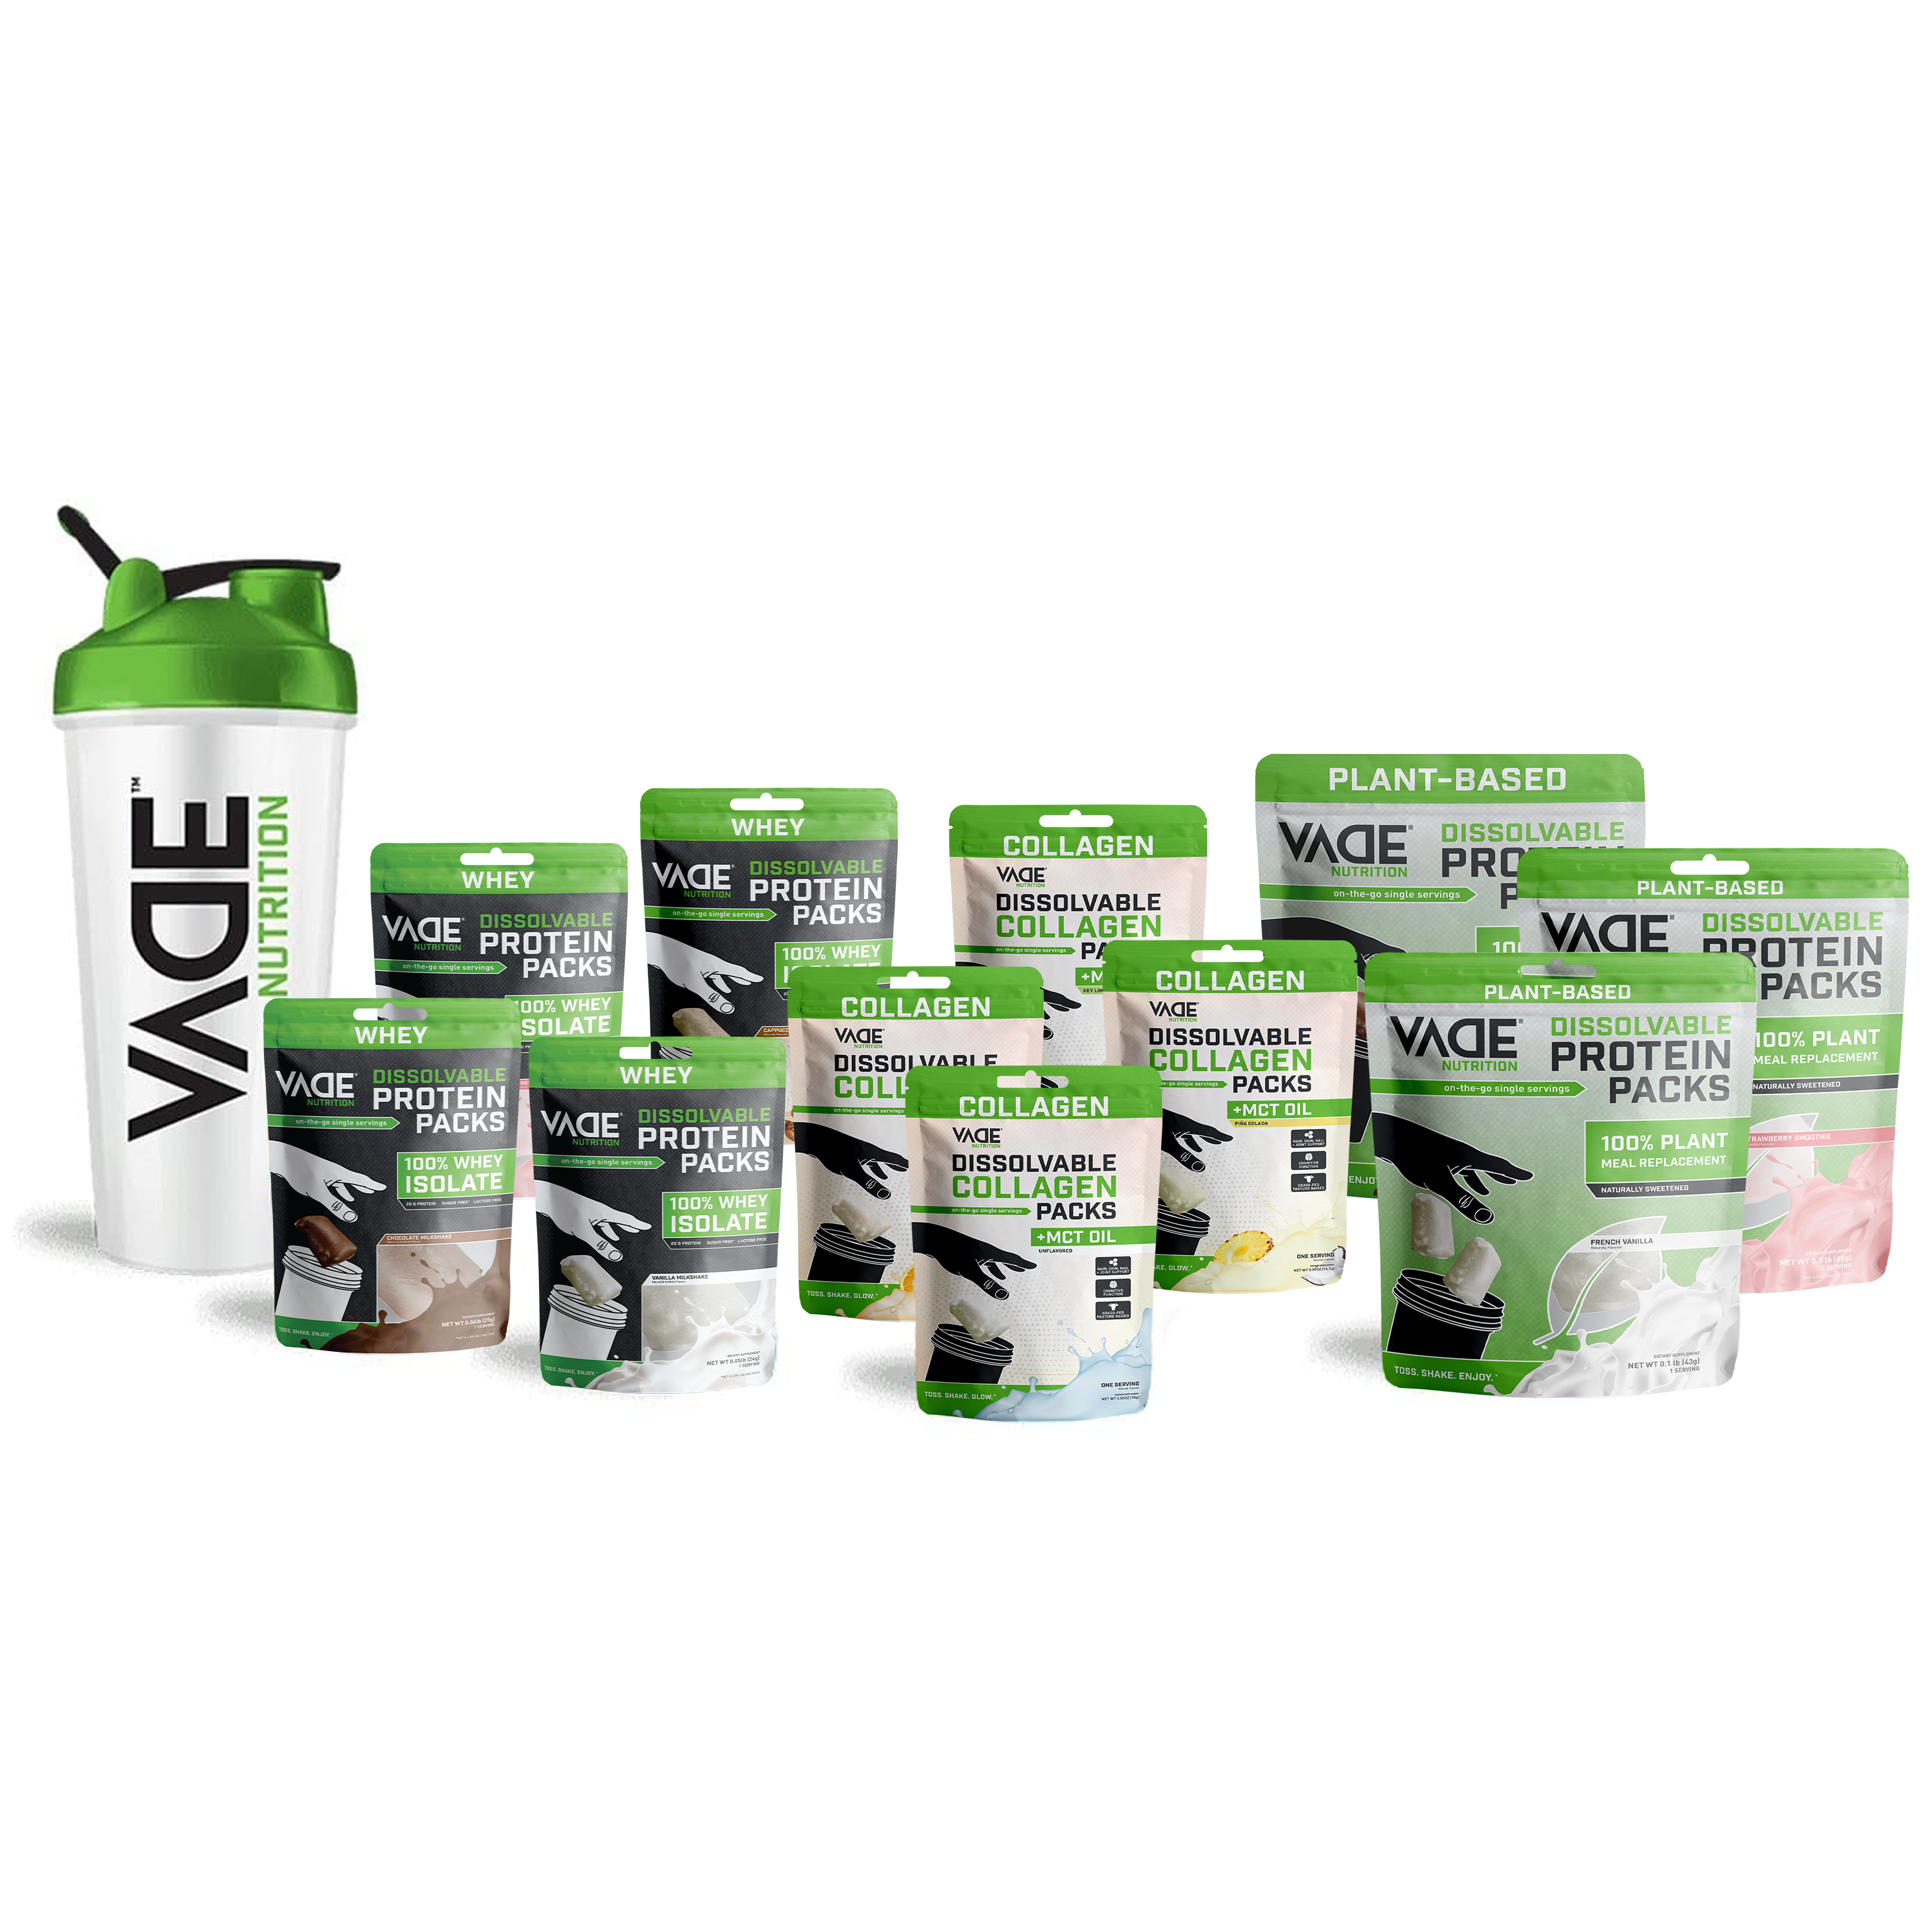 VADE Nutrition Dissolvable Protein Packs | Chocolate, Strawberry, Vanilla,  Cappuccino & Shaker Bottle Bundle, Whey Isolate Protein Powder (8 Pack)